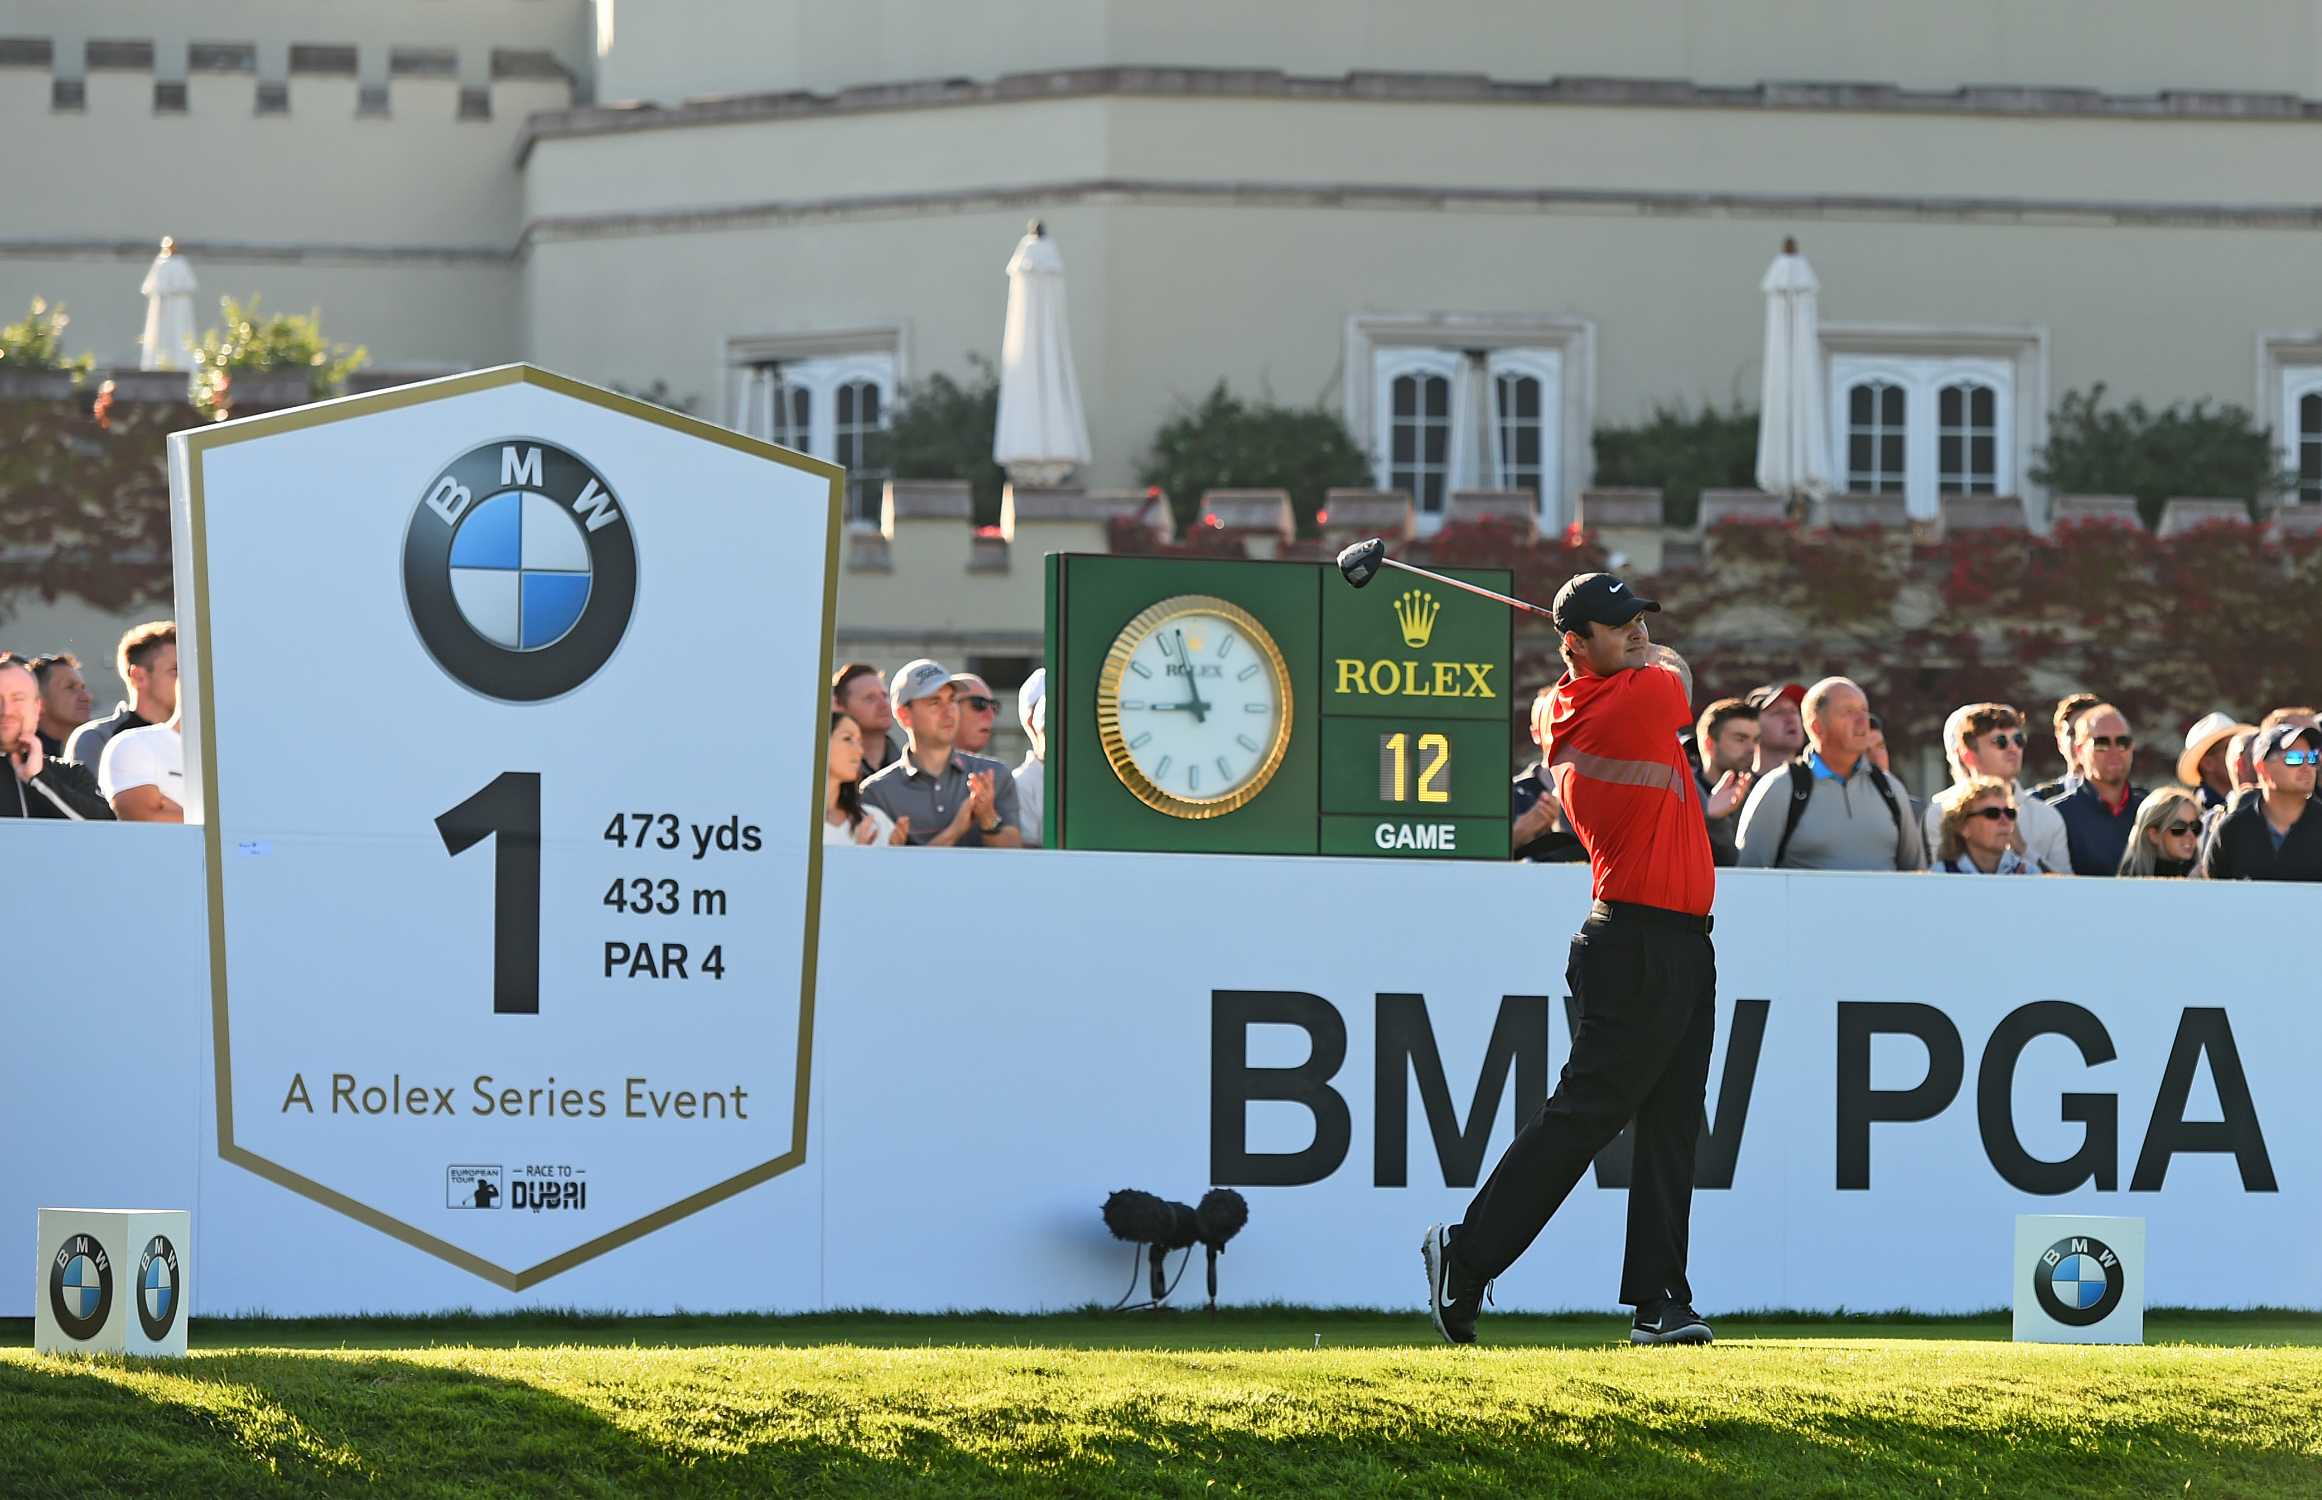 BMW PGA Championship 2020 “The BMW” is the biggest golf tournament of